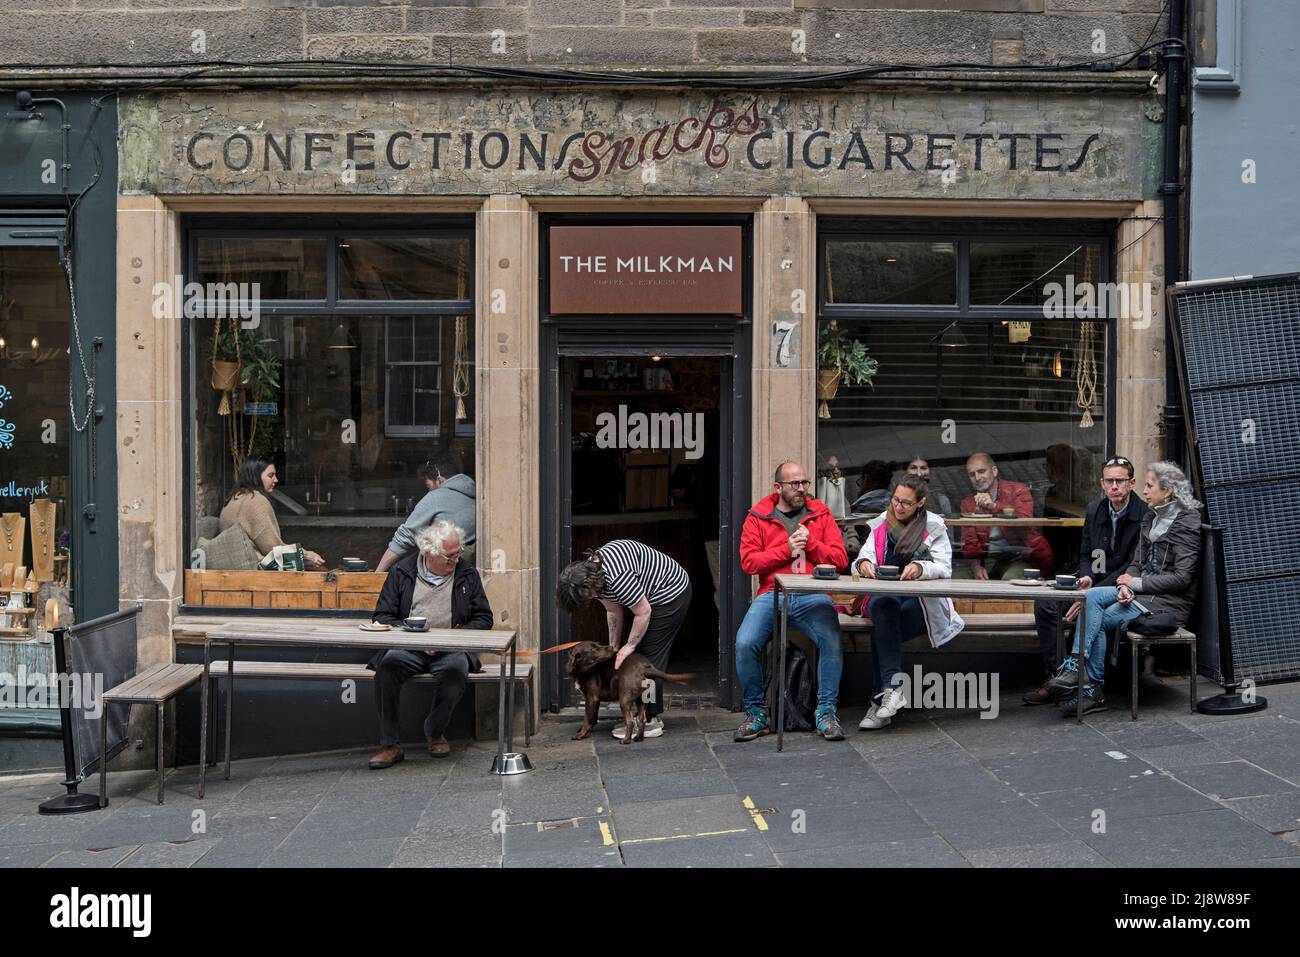 The Milkman, a coffee shop on Cockburn Street in Edinburgh with the original 'Confections Snacks Cigarettes' sign painted on the wall. Stock Photo